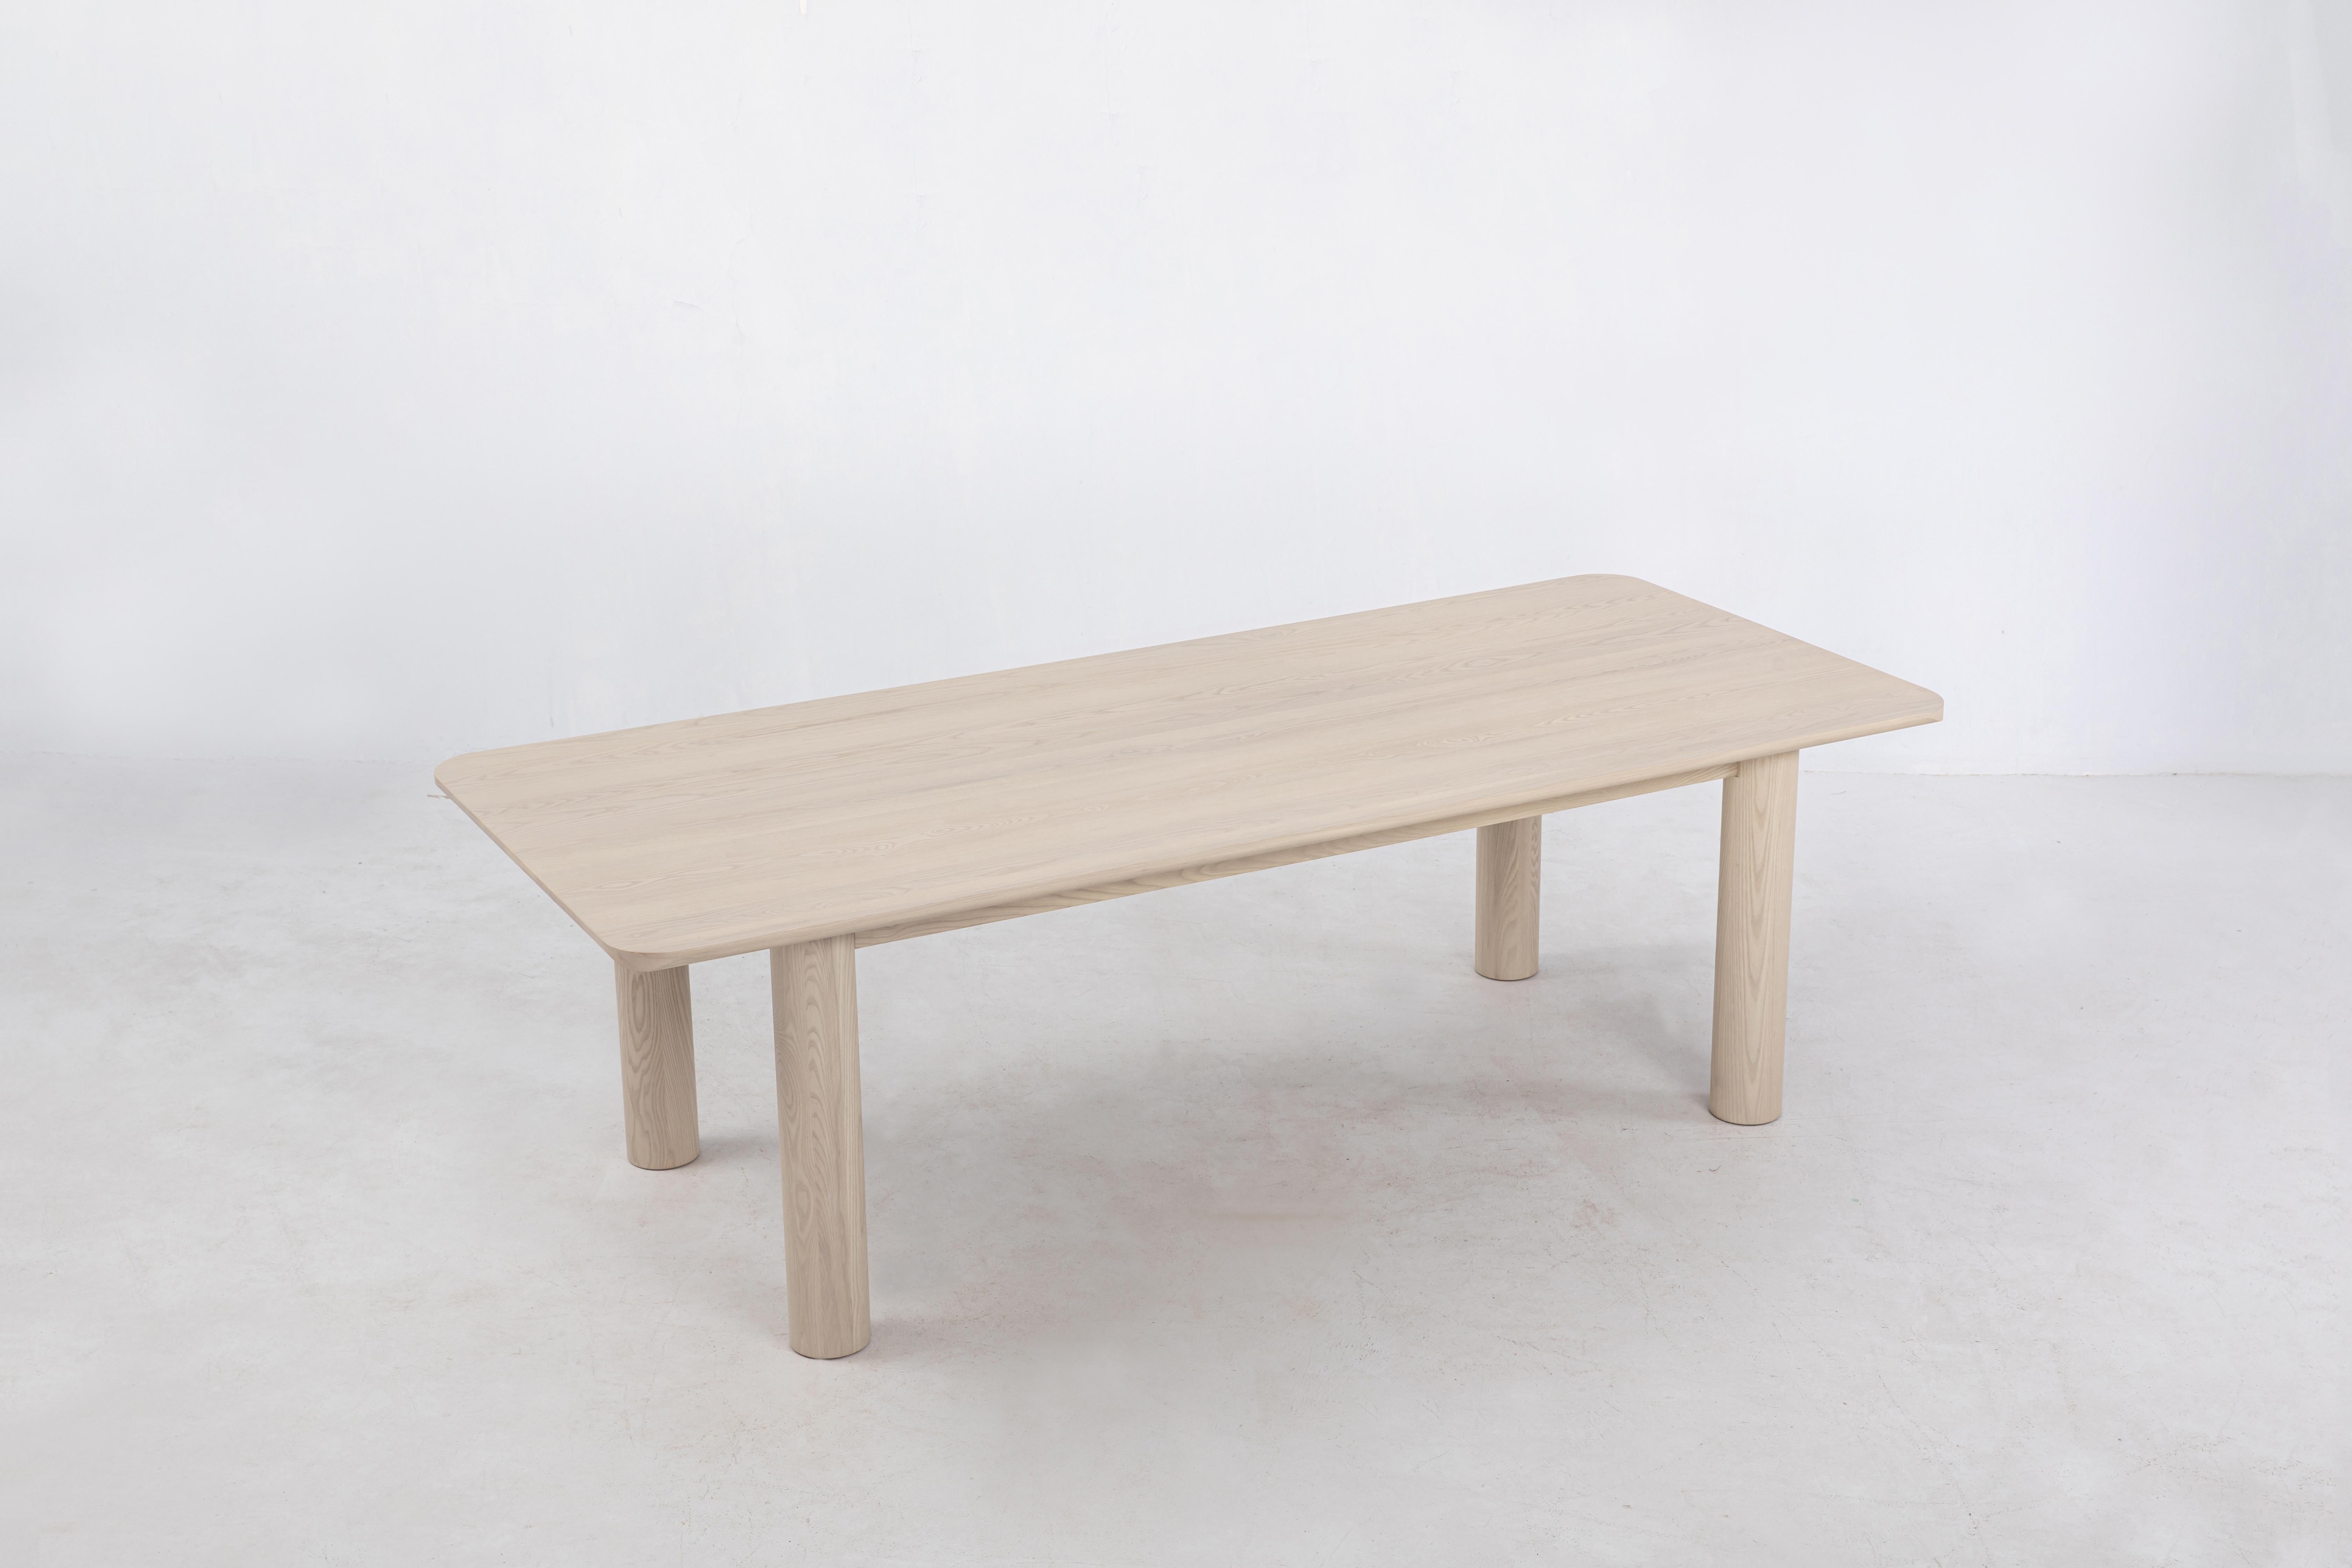 Arc Dining Table 98